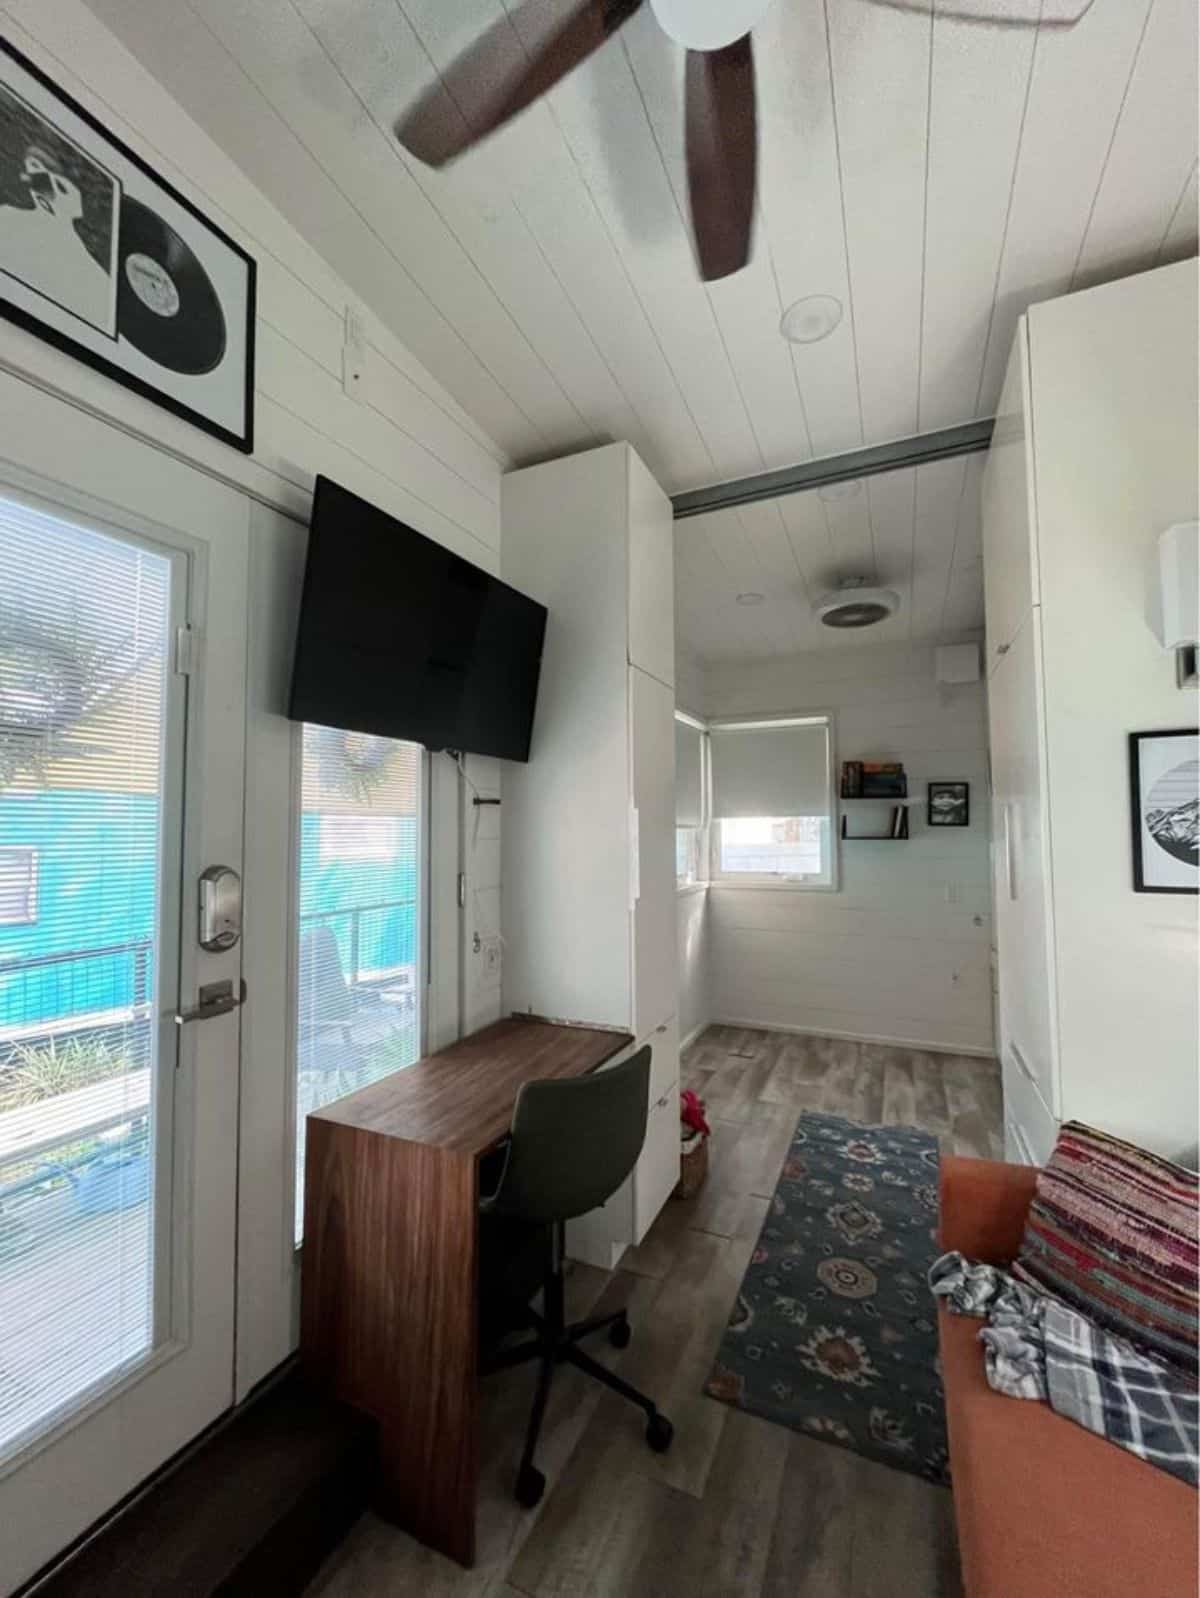 interiors of fully furnished tiny home